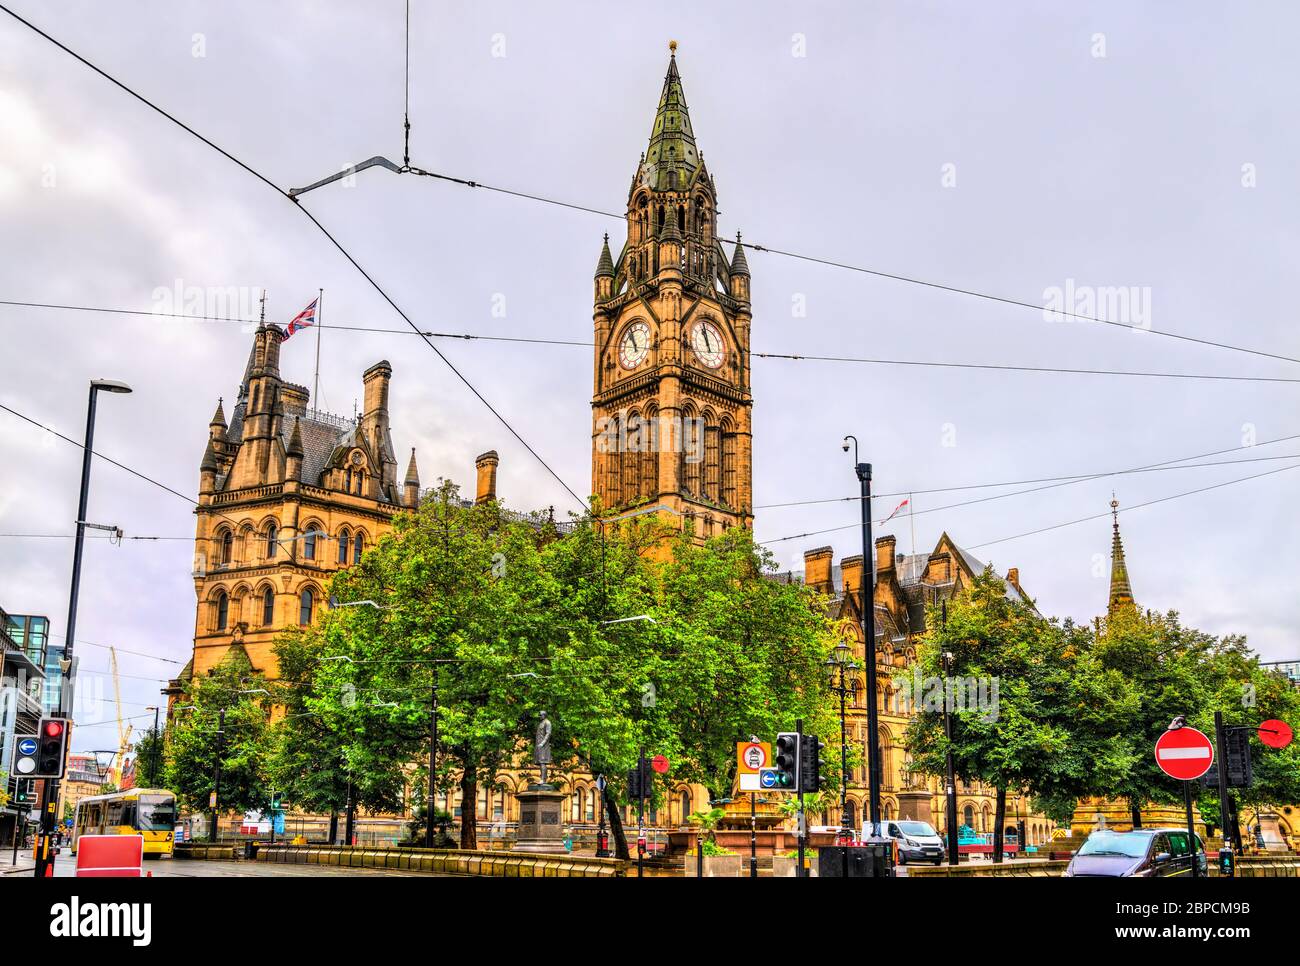 Manchester Town Hall in England Stockfoto